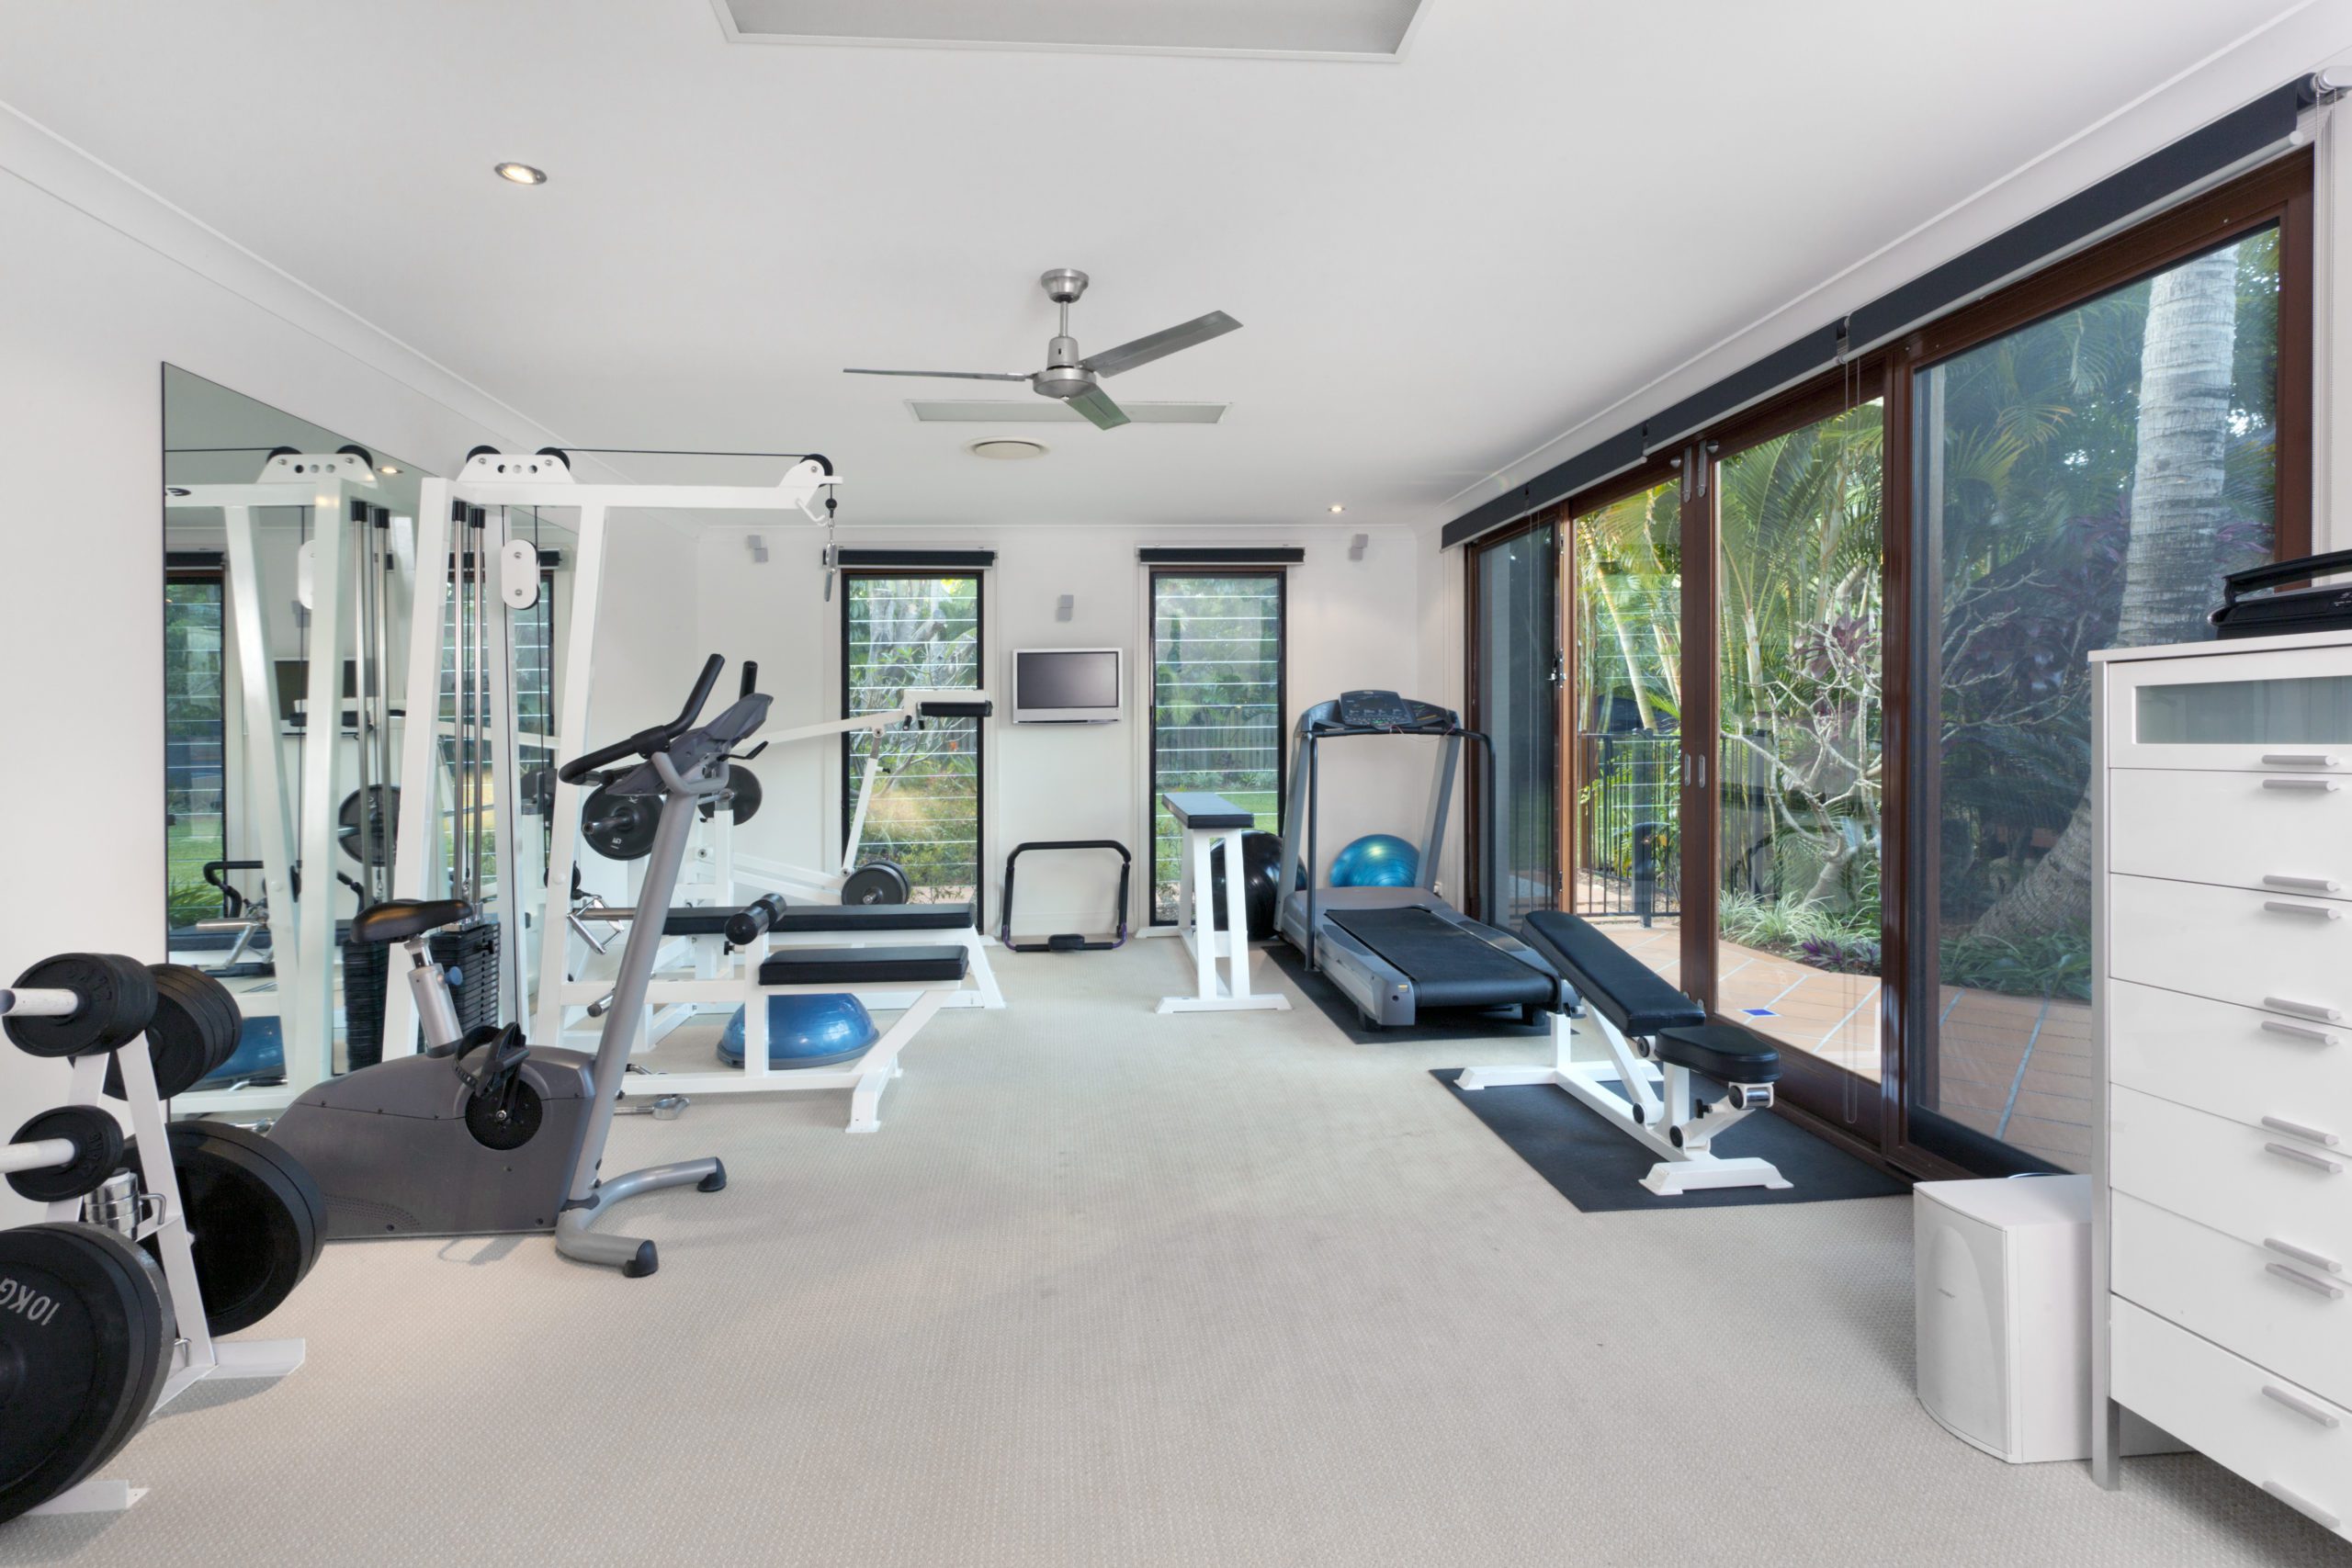 The Top 5 Best Home Gym Equipment for Your Airbnb 2022